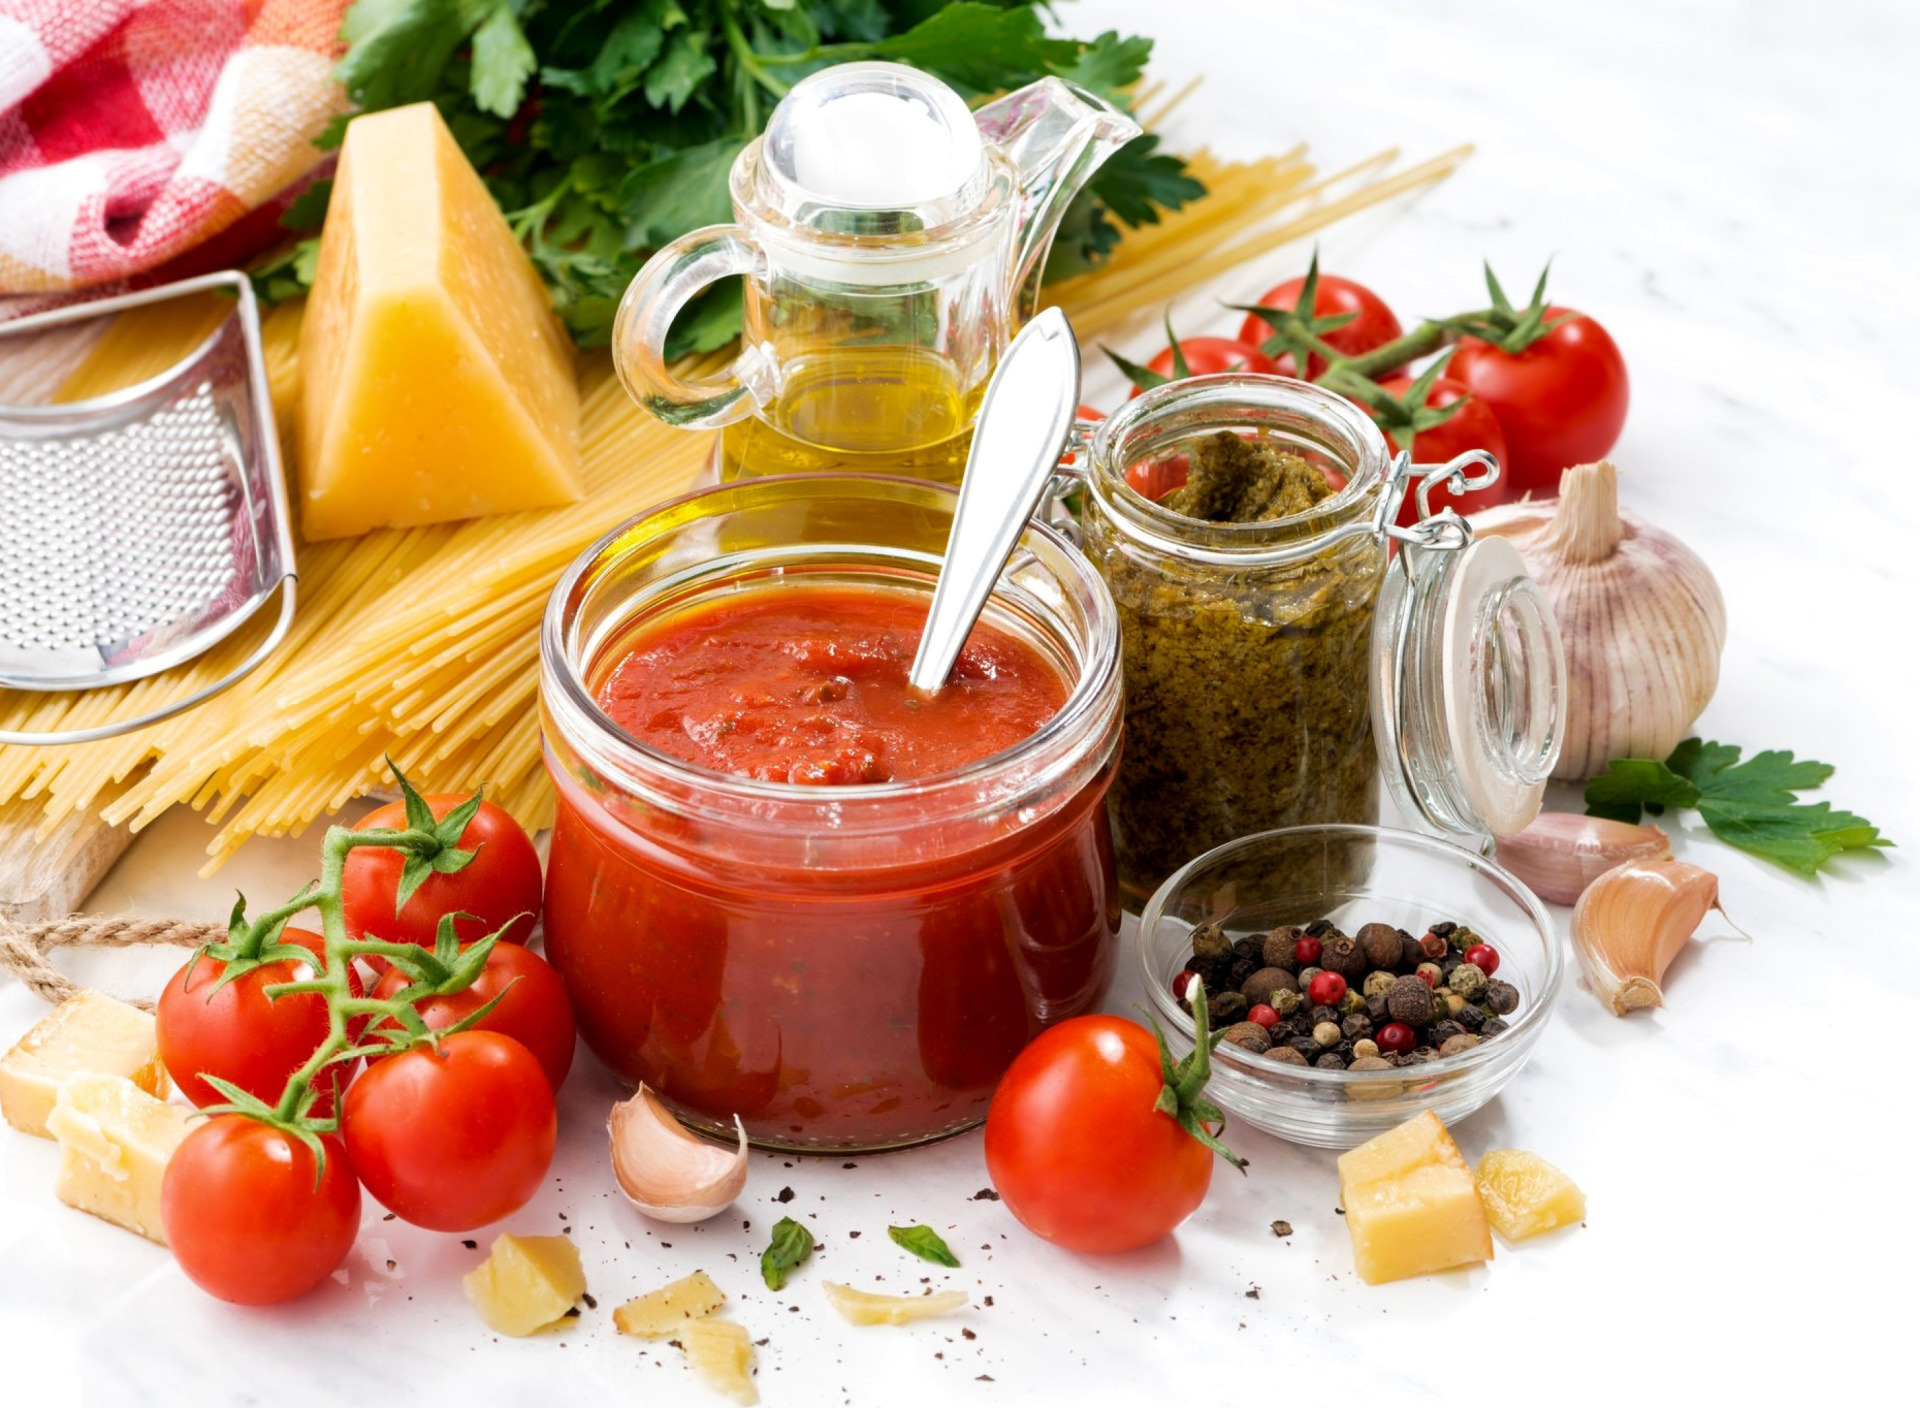 Lecho with tomatoes, spices and cheese wallpaper 1920x1408